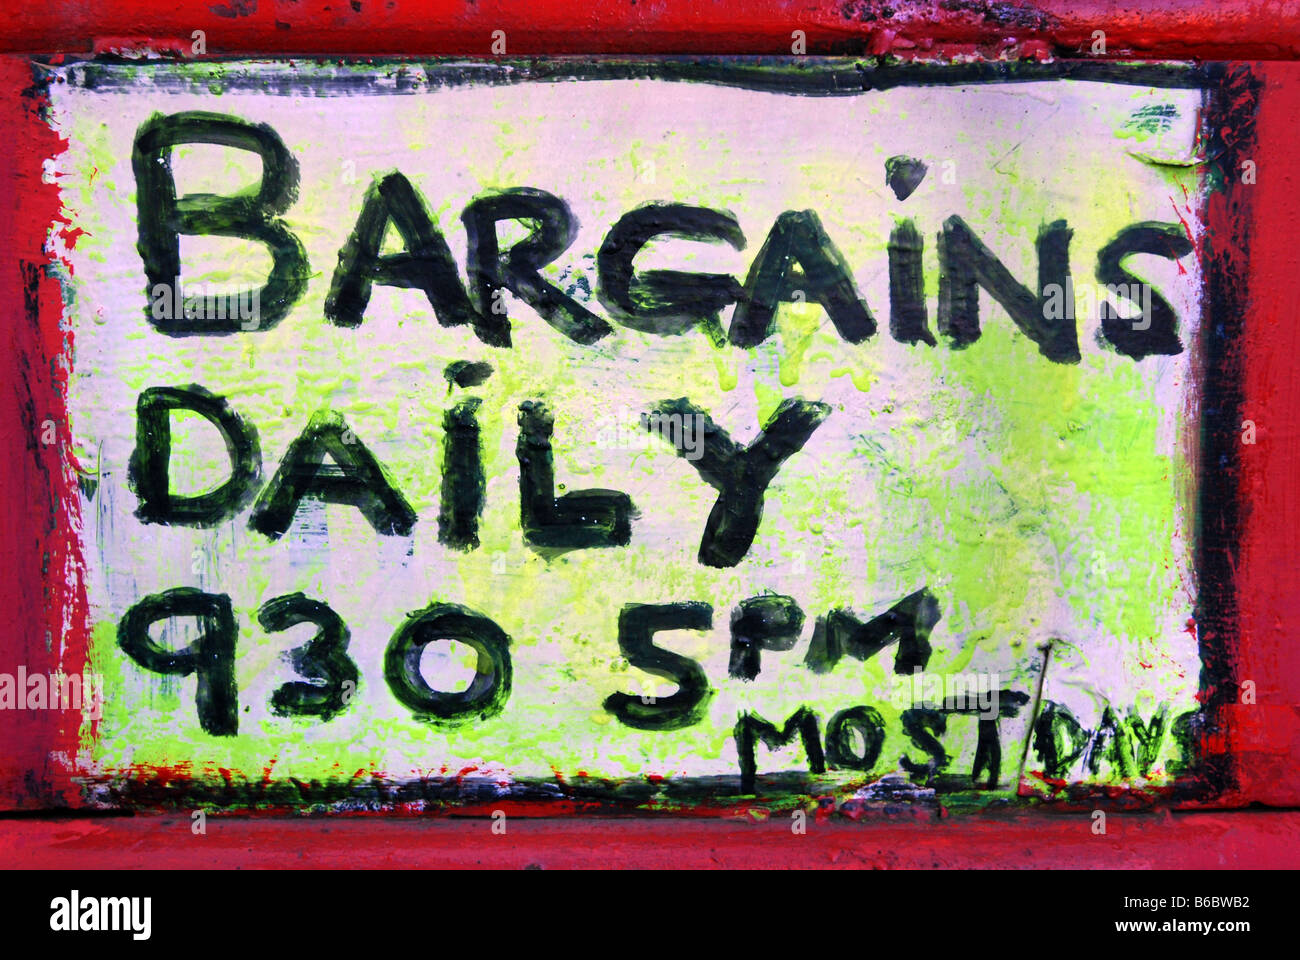 Bargains Daily Stock Photo